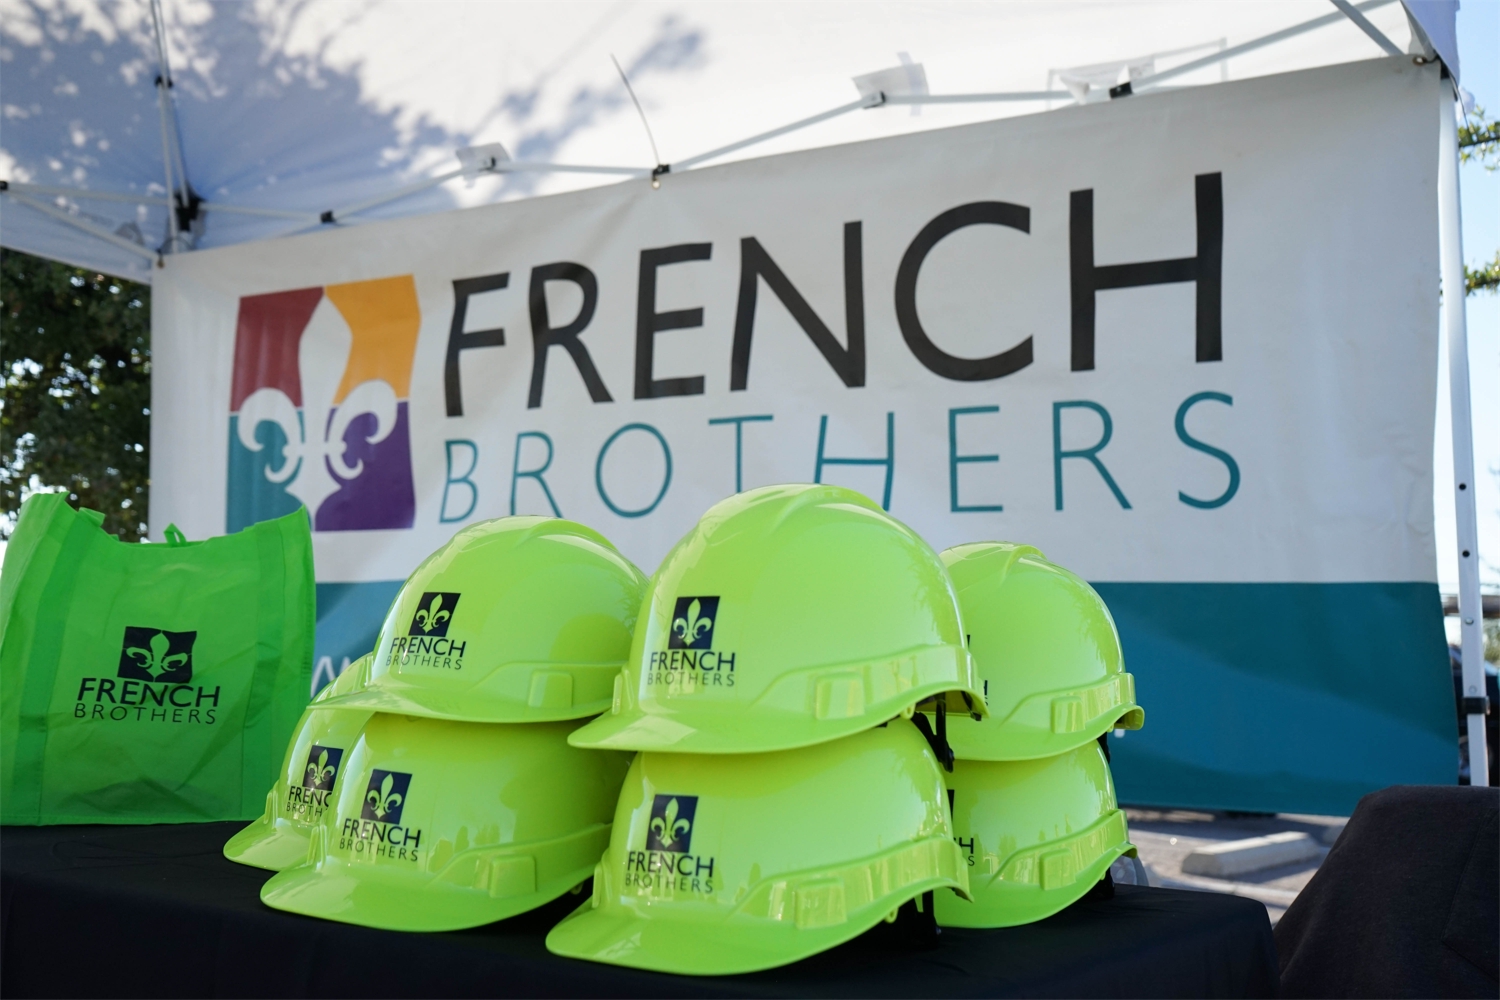 French brothers helmets.jpg